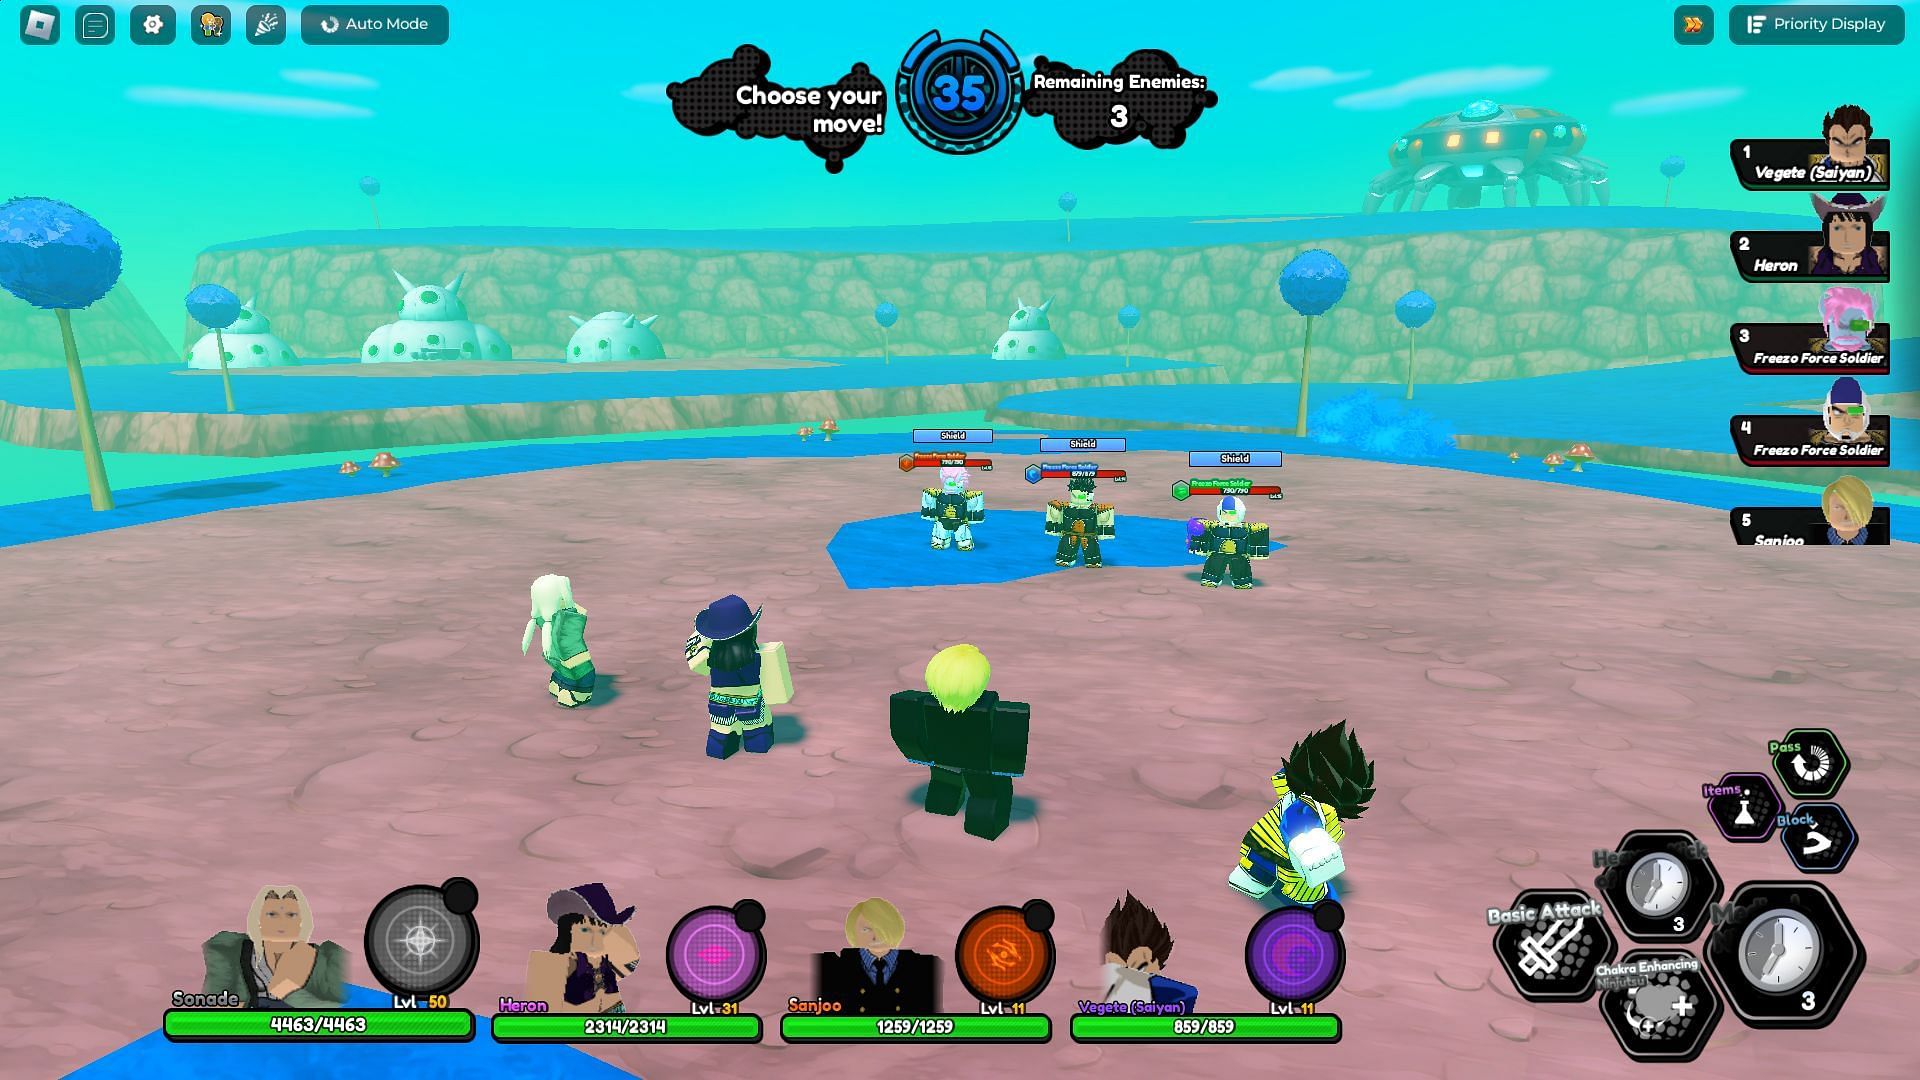 The Big Blue stage in Challenge mode (Image via Roblox)